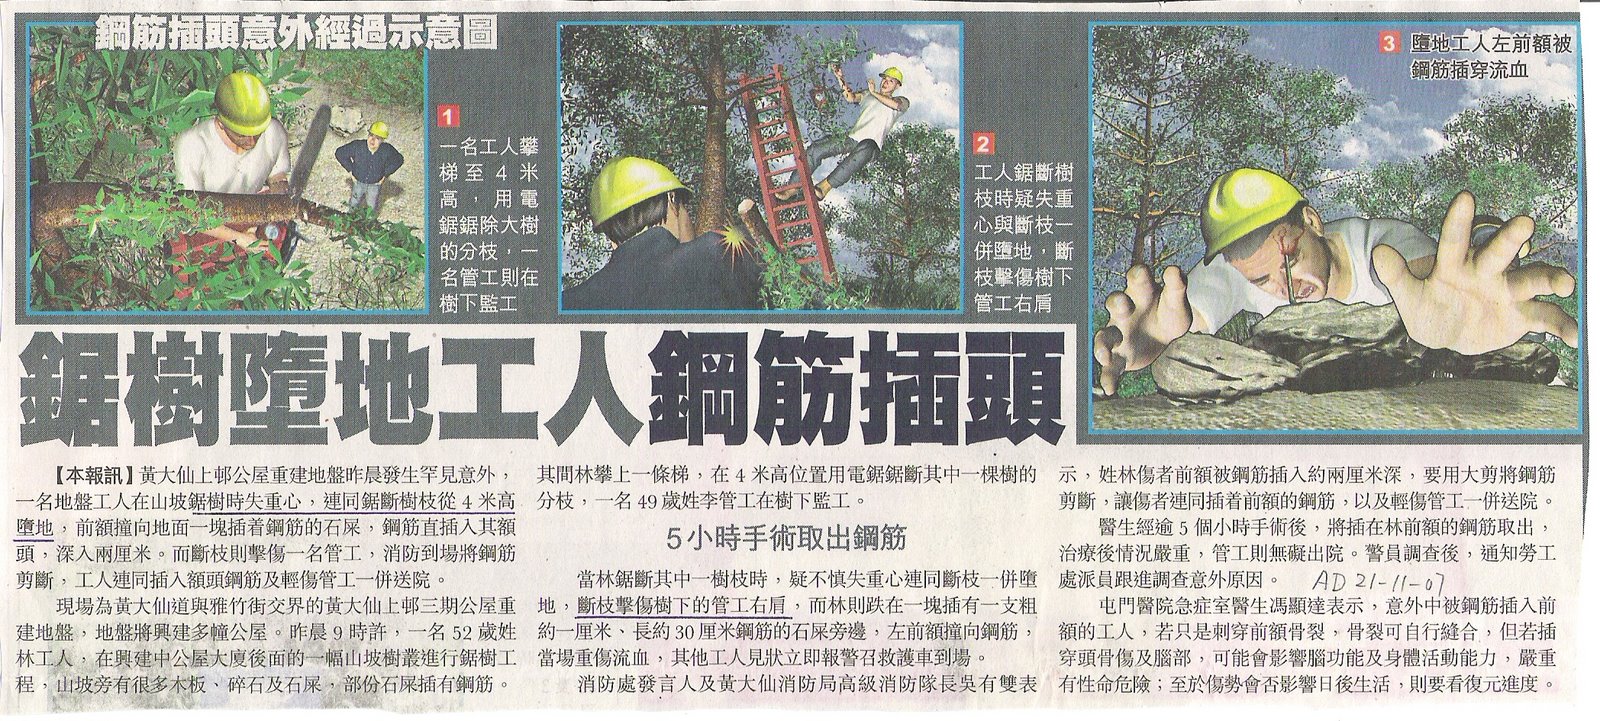 [HK+Tree+News+---+WTS+Chainsaw+Accident+1.jpg]